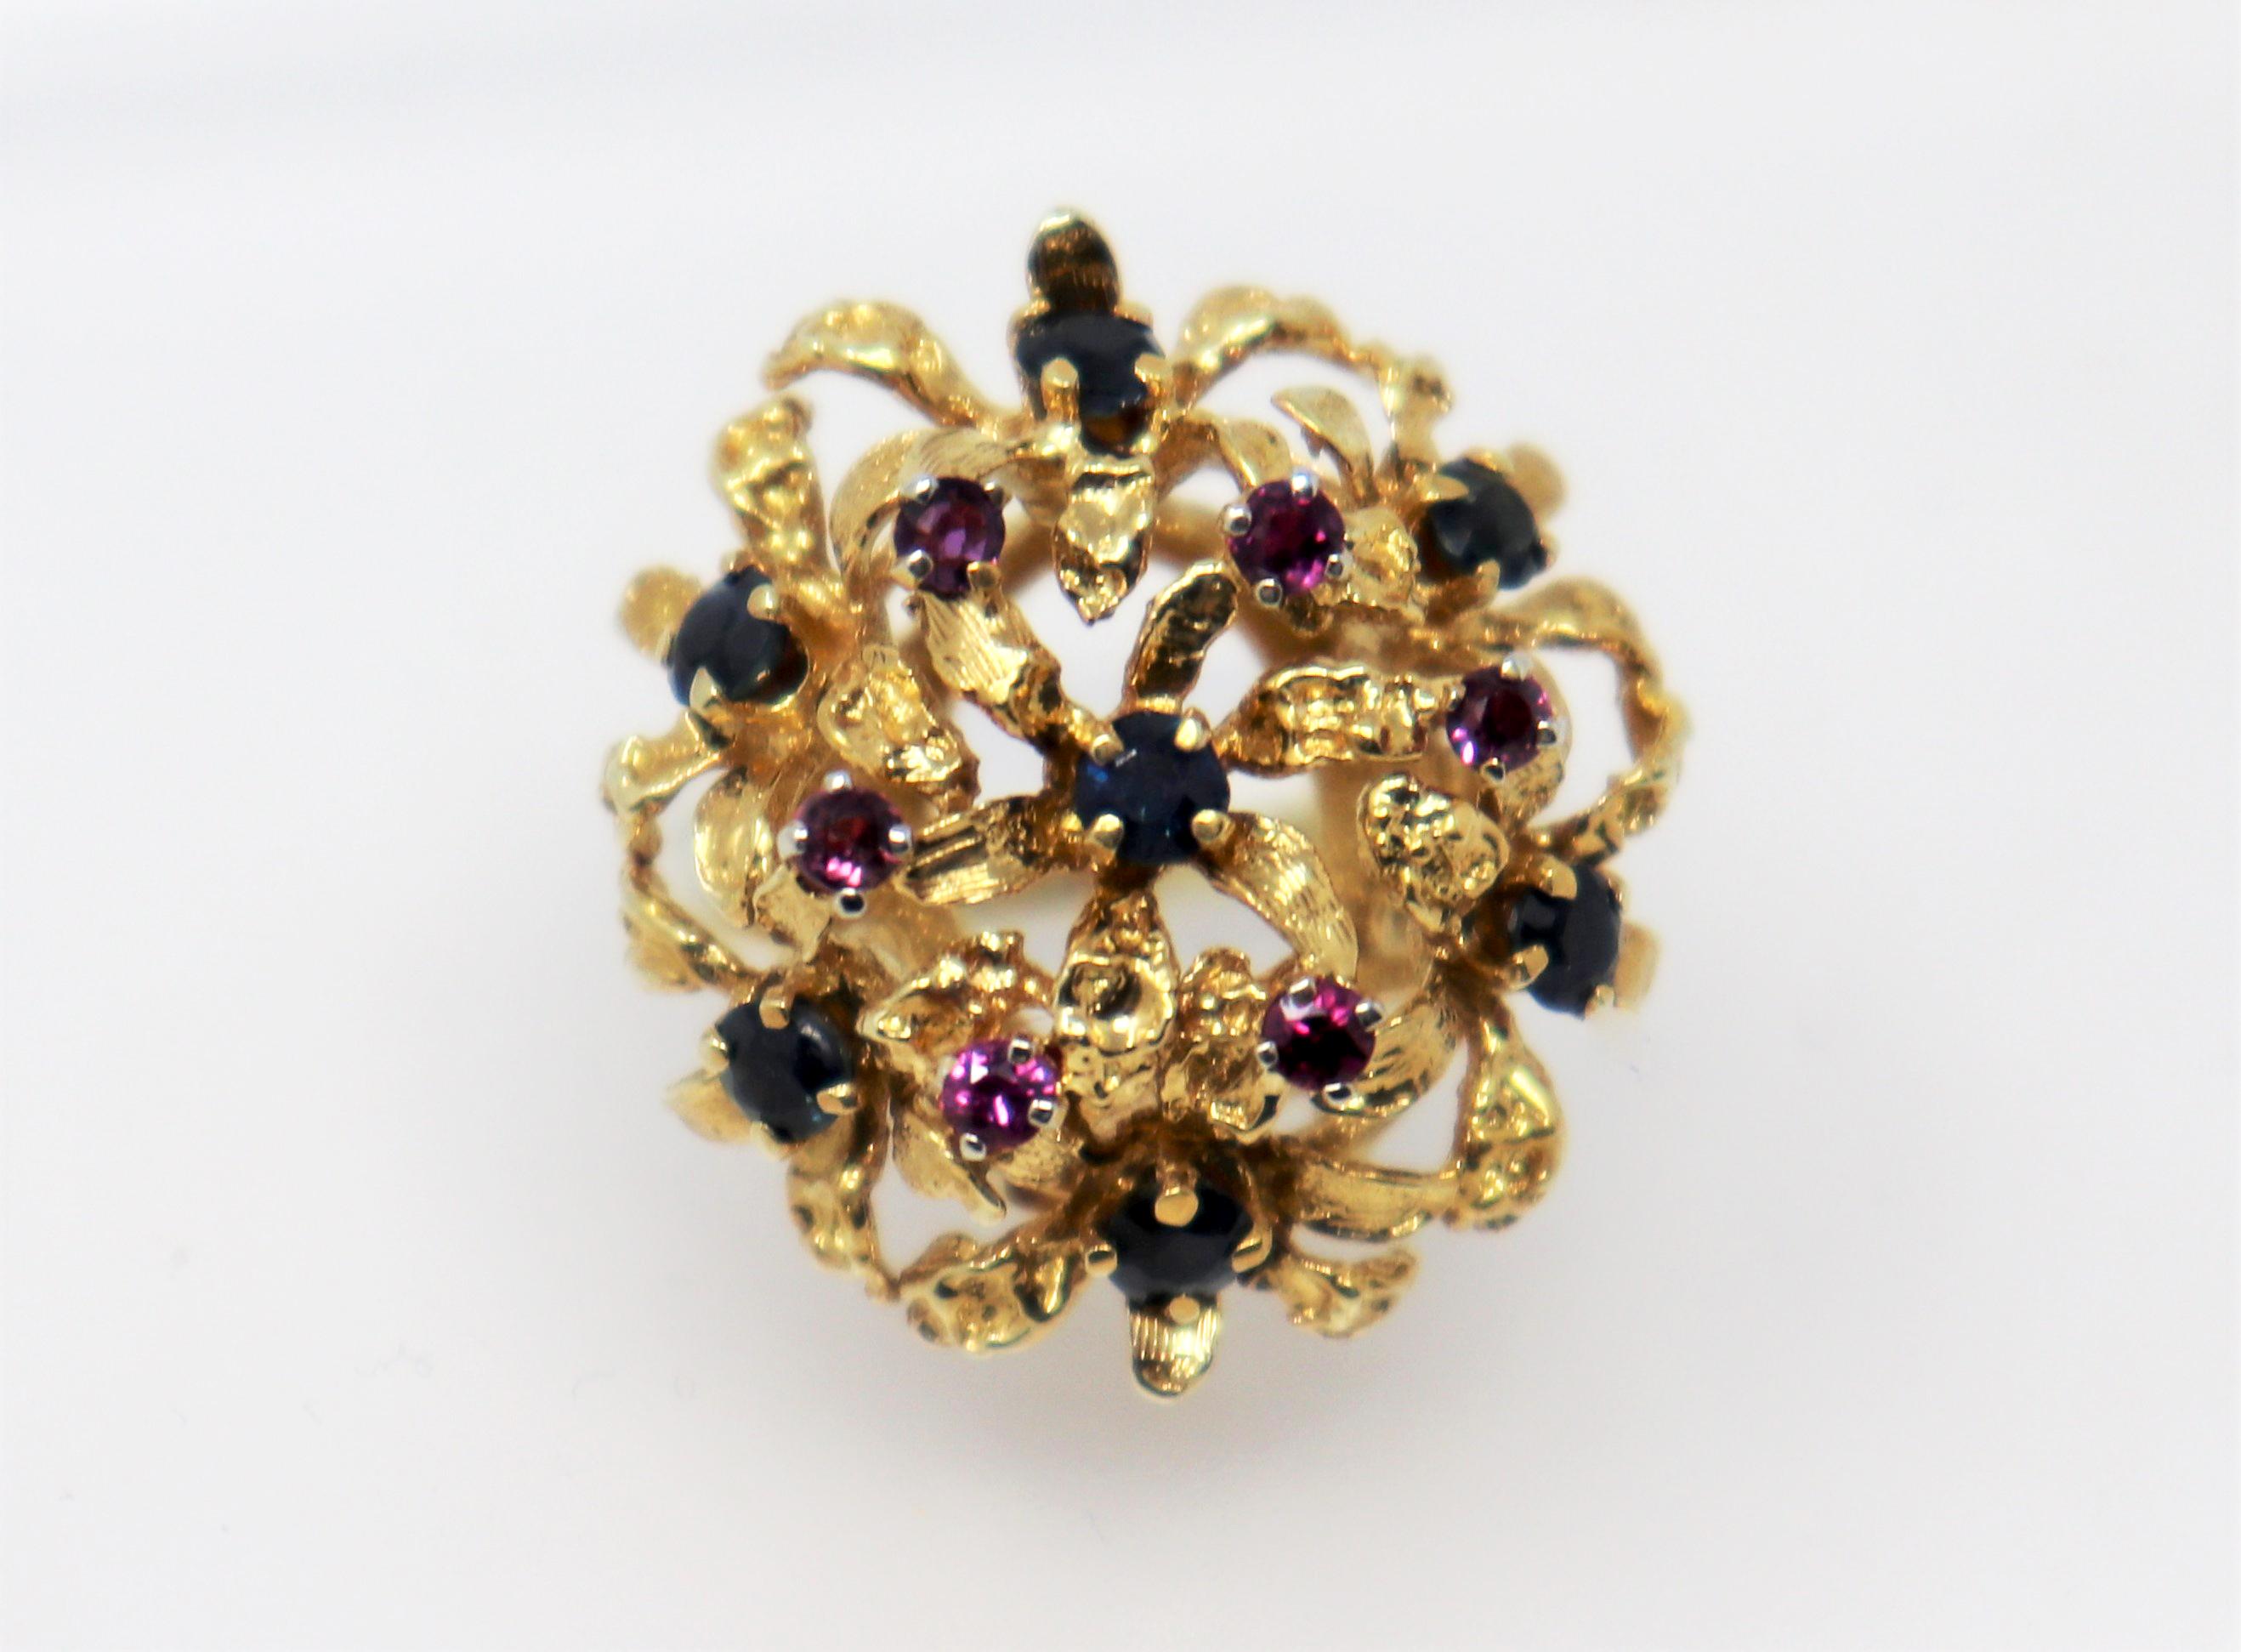 Ring size: 6.75

Lovely vintage cocktail ring bursting with vibrant color. This beautiful piece features a romantic, feminine dome style setting accented by blue and purple sapphires. The colorful rounded cluster with its intricate gold design 